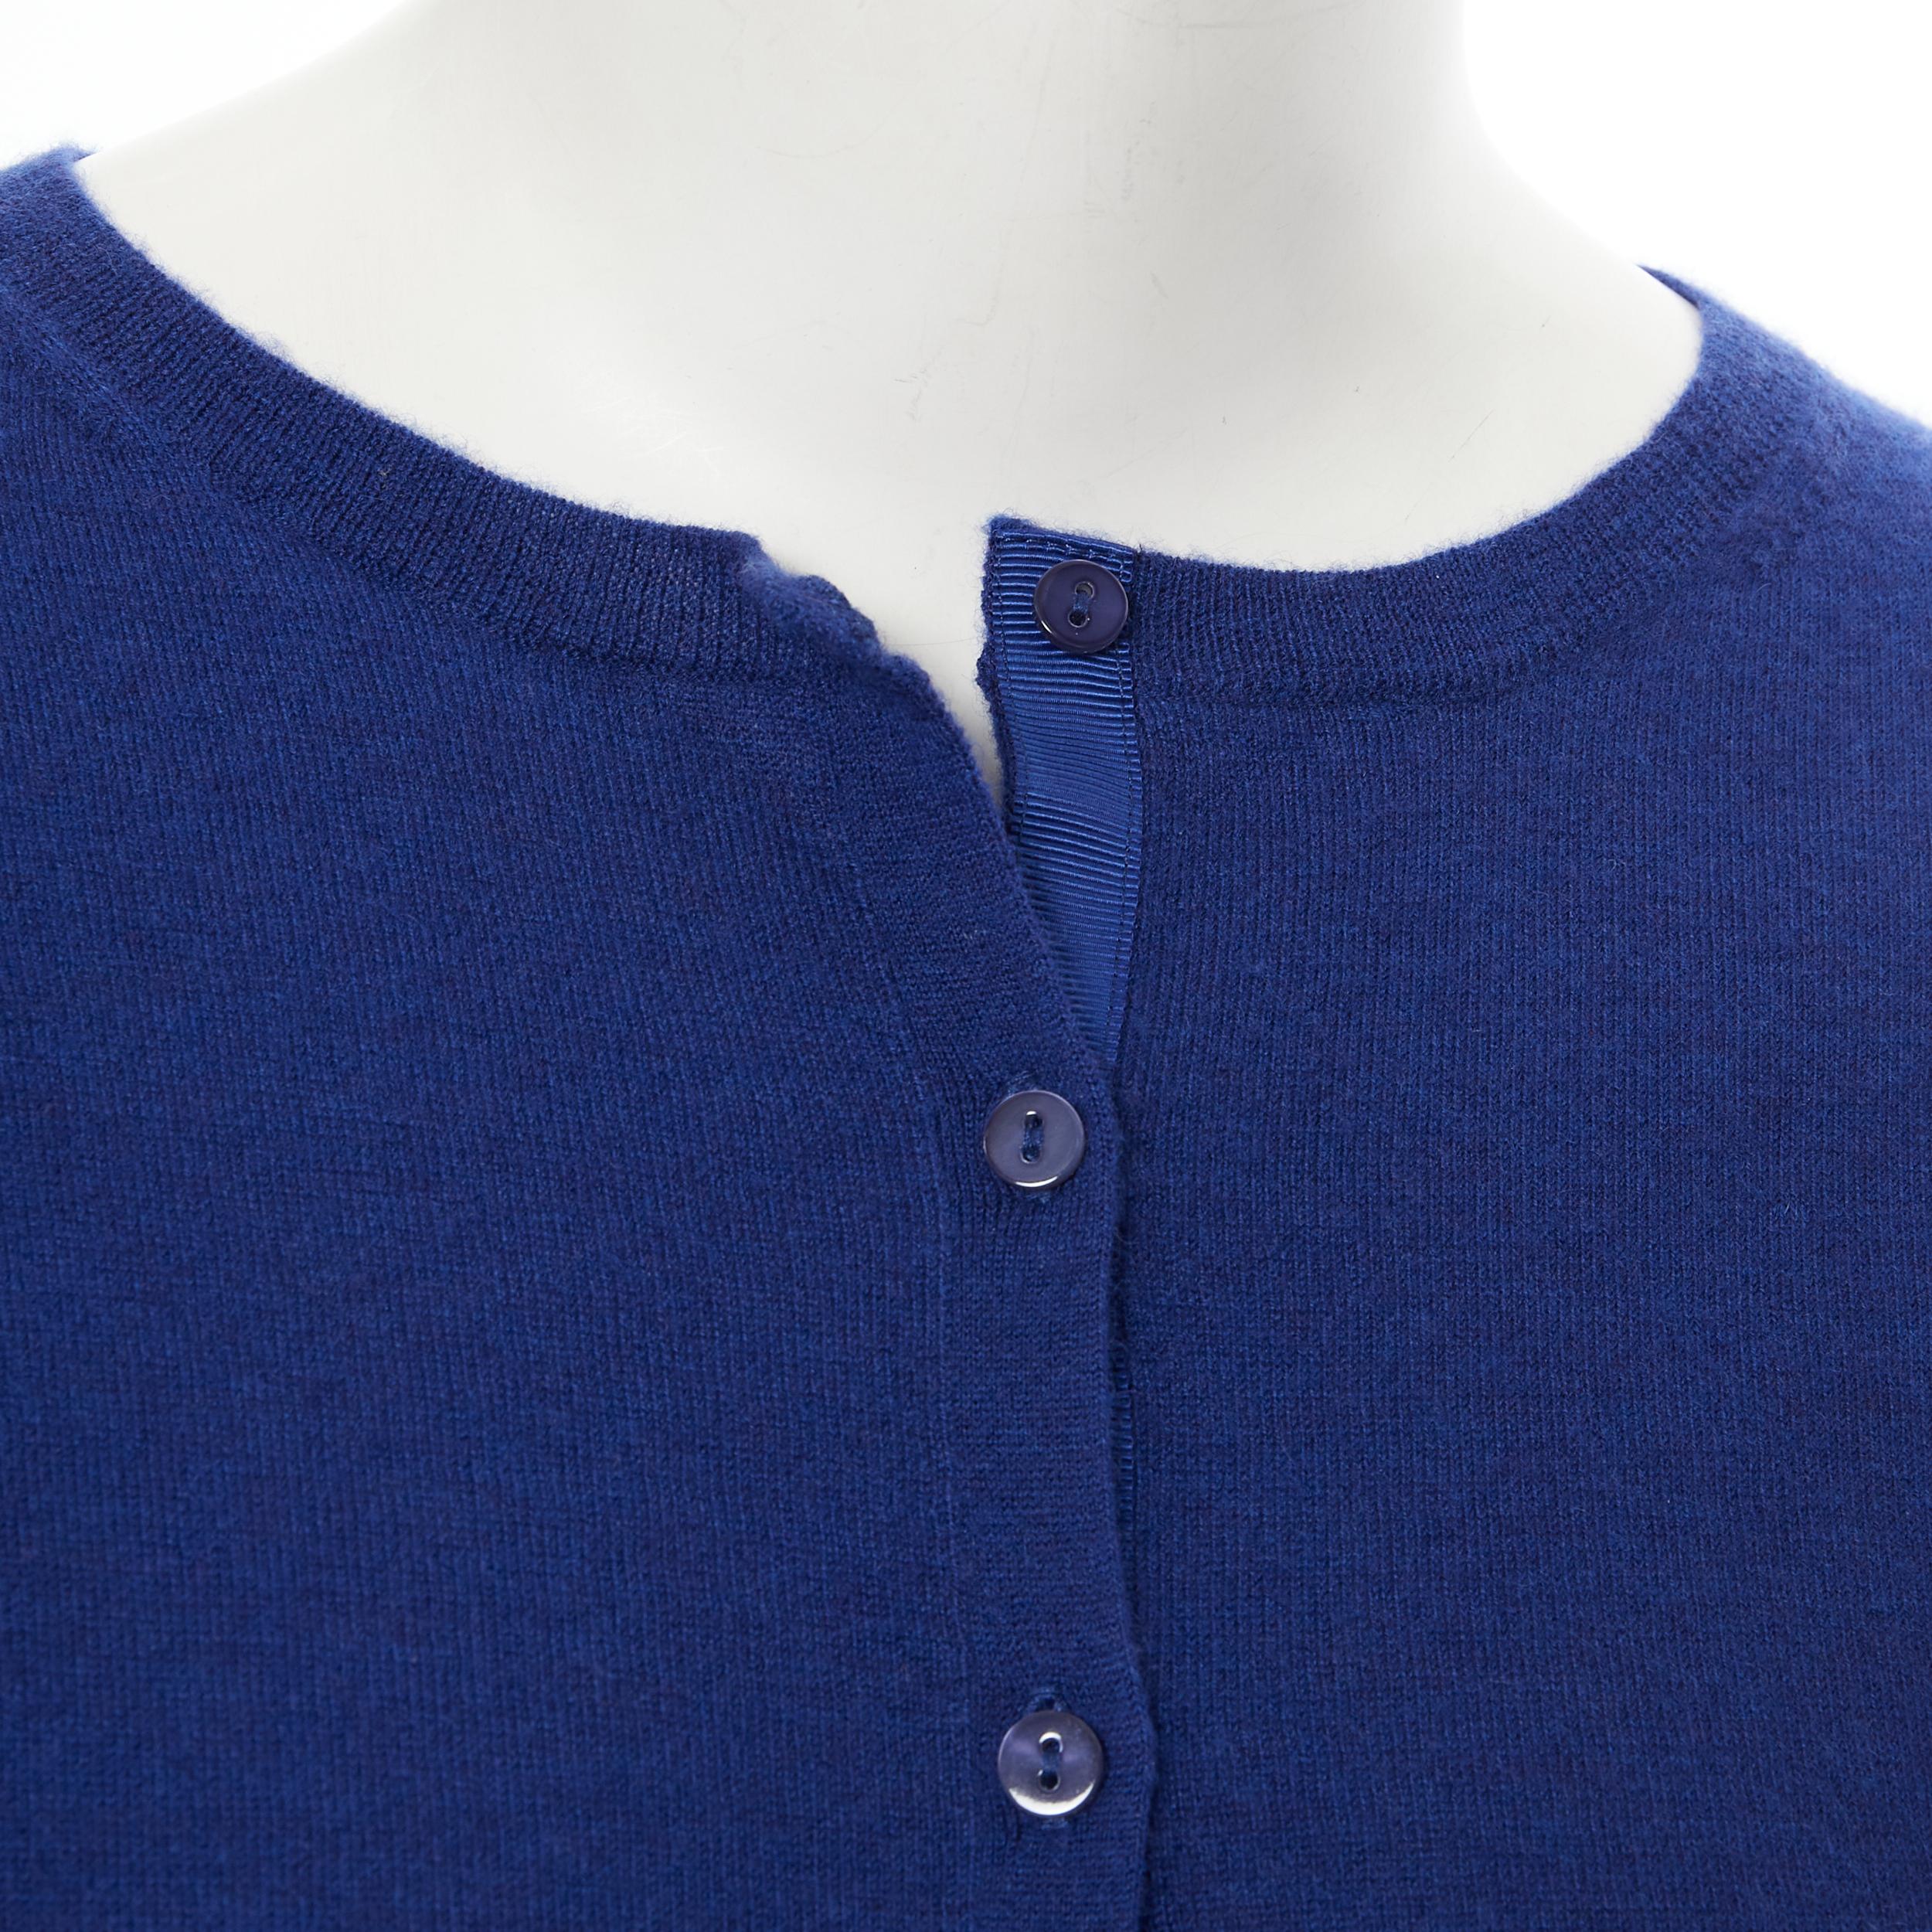 JOSEPH 100% cashmere cobalt blue button front cardigan sweater S 
Reference: LNKO/A01822 
Brand: Joseph 
Material: Cashmere 
Color: Blue 
Pattern: Solid 
Closure: Button 
Extra Detail: 100% cashmere. Button front. 
Made in: China 

CONDITION: